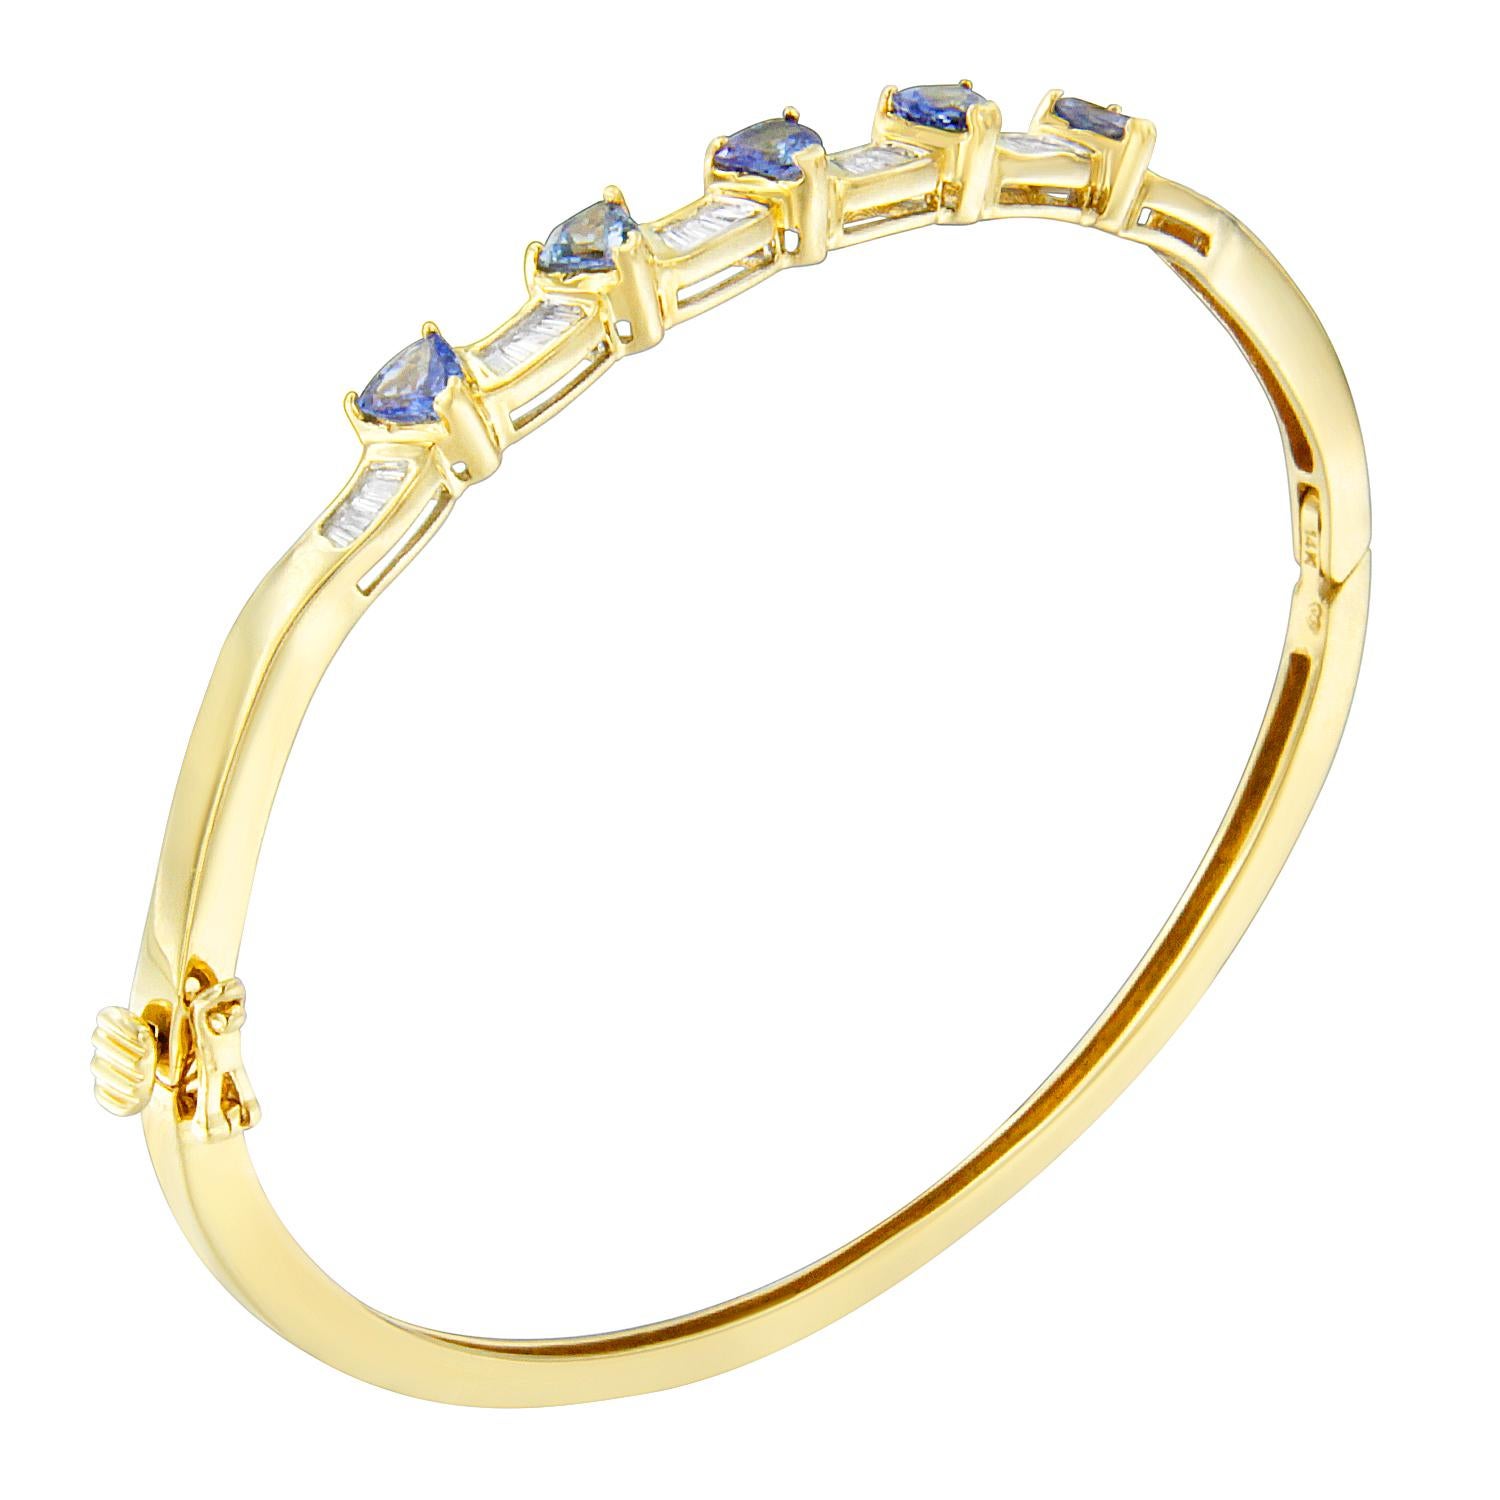 Contemporary 14k Yellow Gold 1/3 Carat Baguette-Cut Diamond and Tanzanite Bangle For Sale